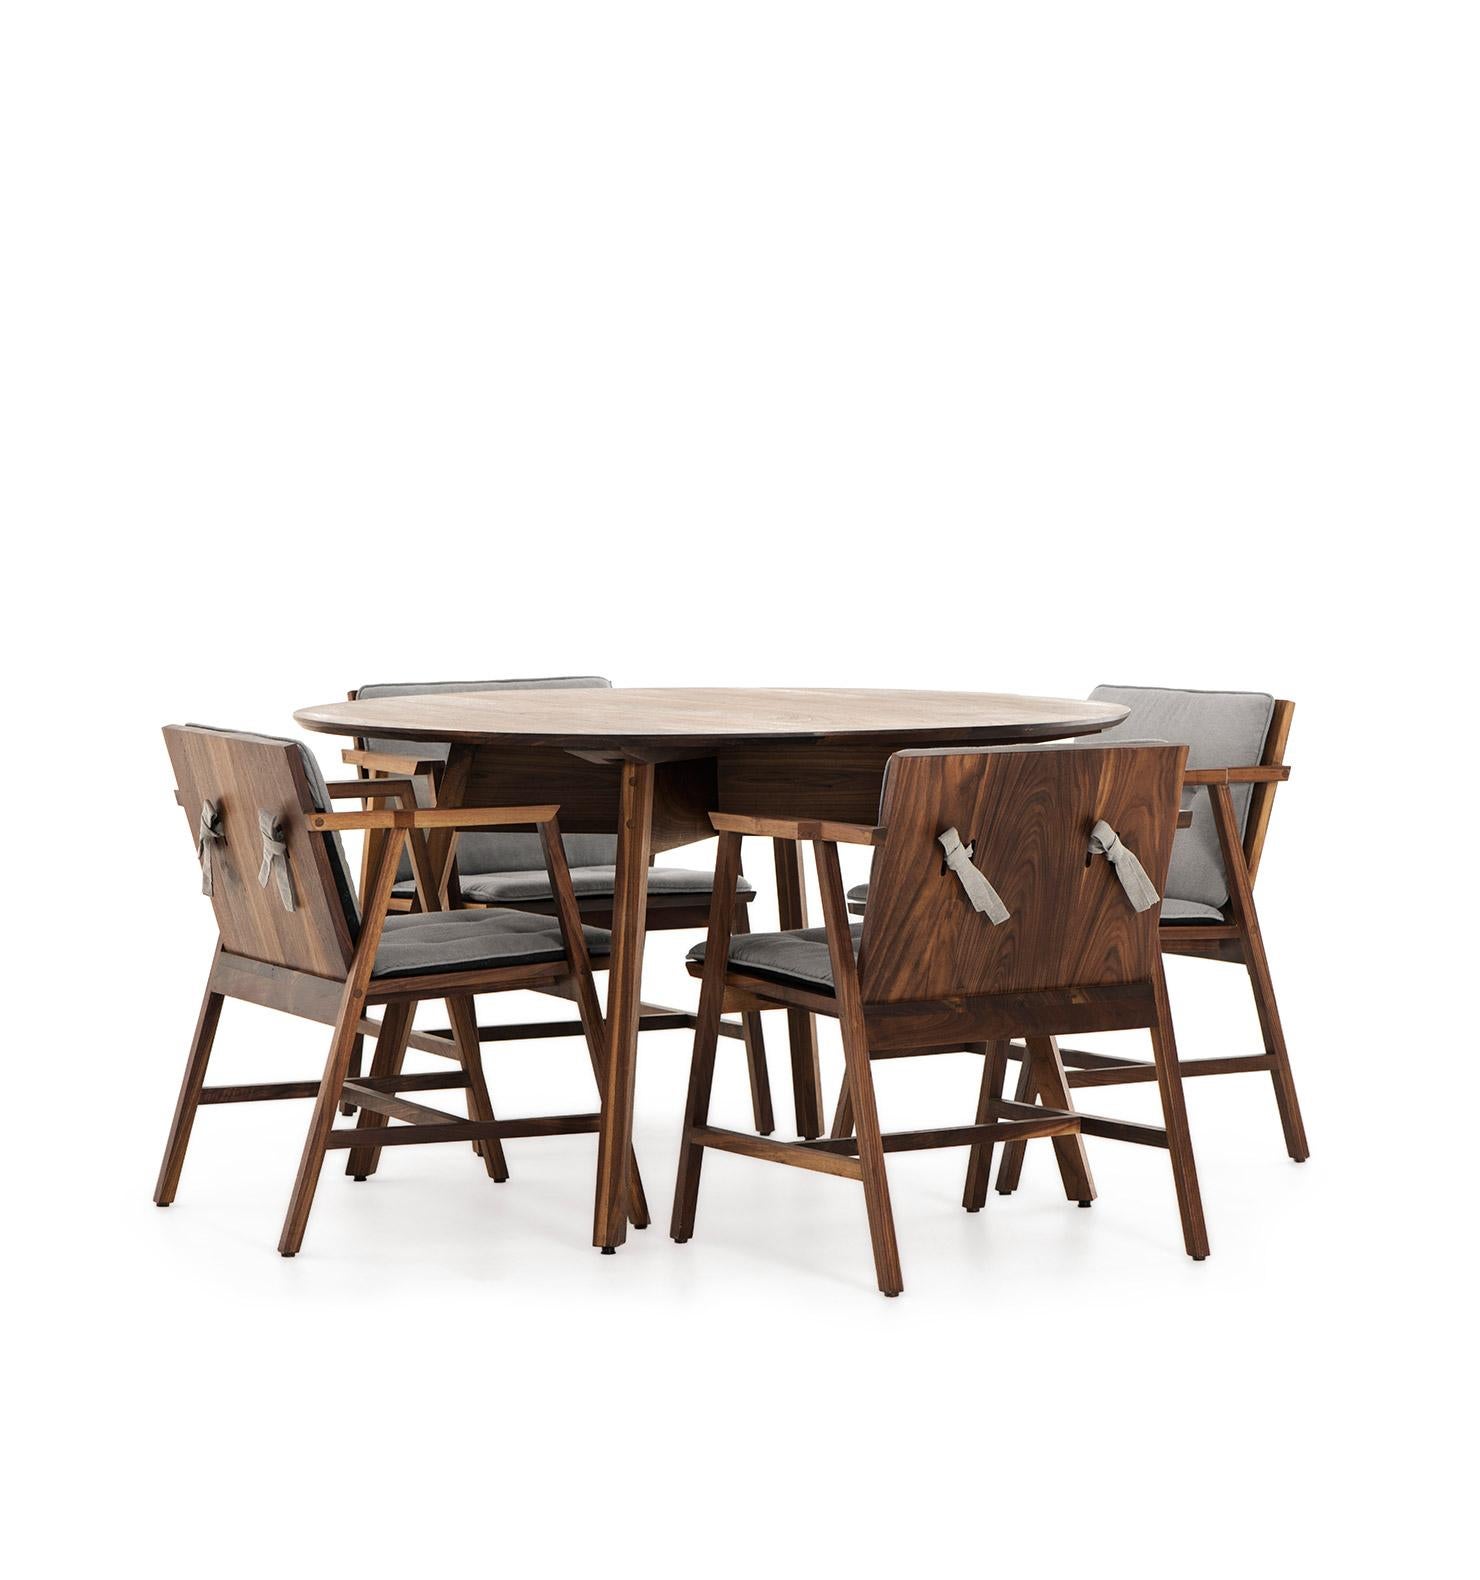 Introducing the Comedor Redondo DEDO, a Mexican Contemporary 4 Seat Dining Set designed by Emiliano Molina for CUCHARA. This dining set offers efficient and functional utilization of both its table top and the room in which it is placed. With a